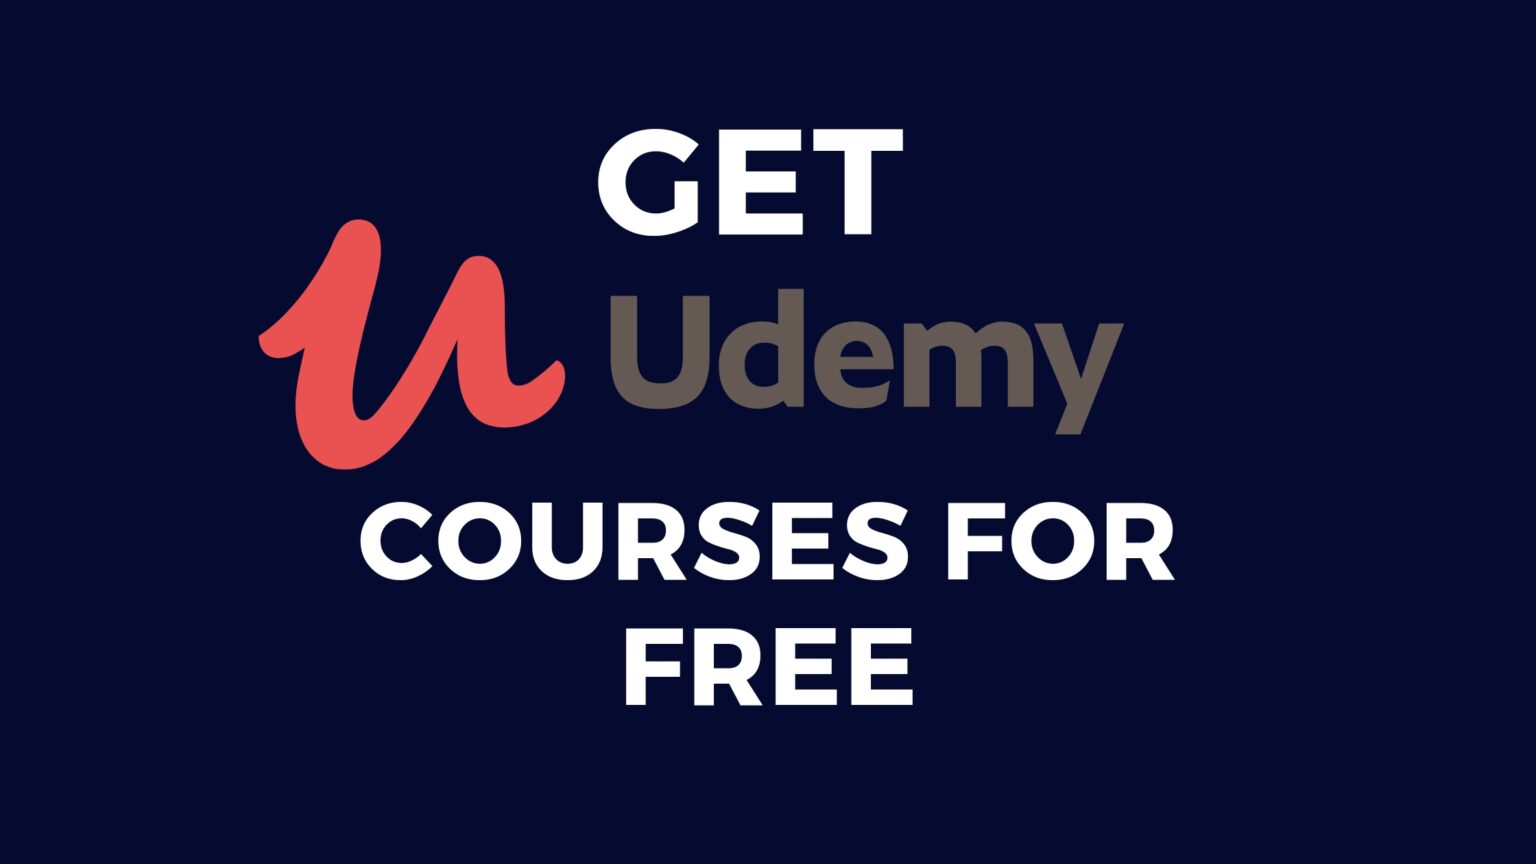 How To Get Udemy Paid Courses For Free [3 Simple Ways]